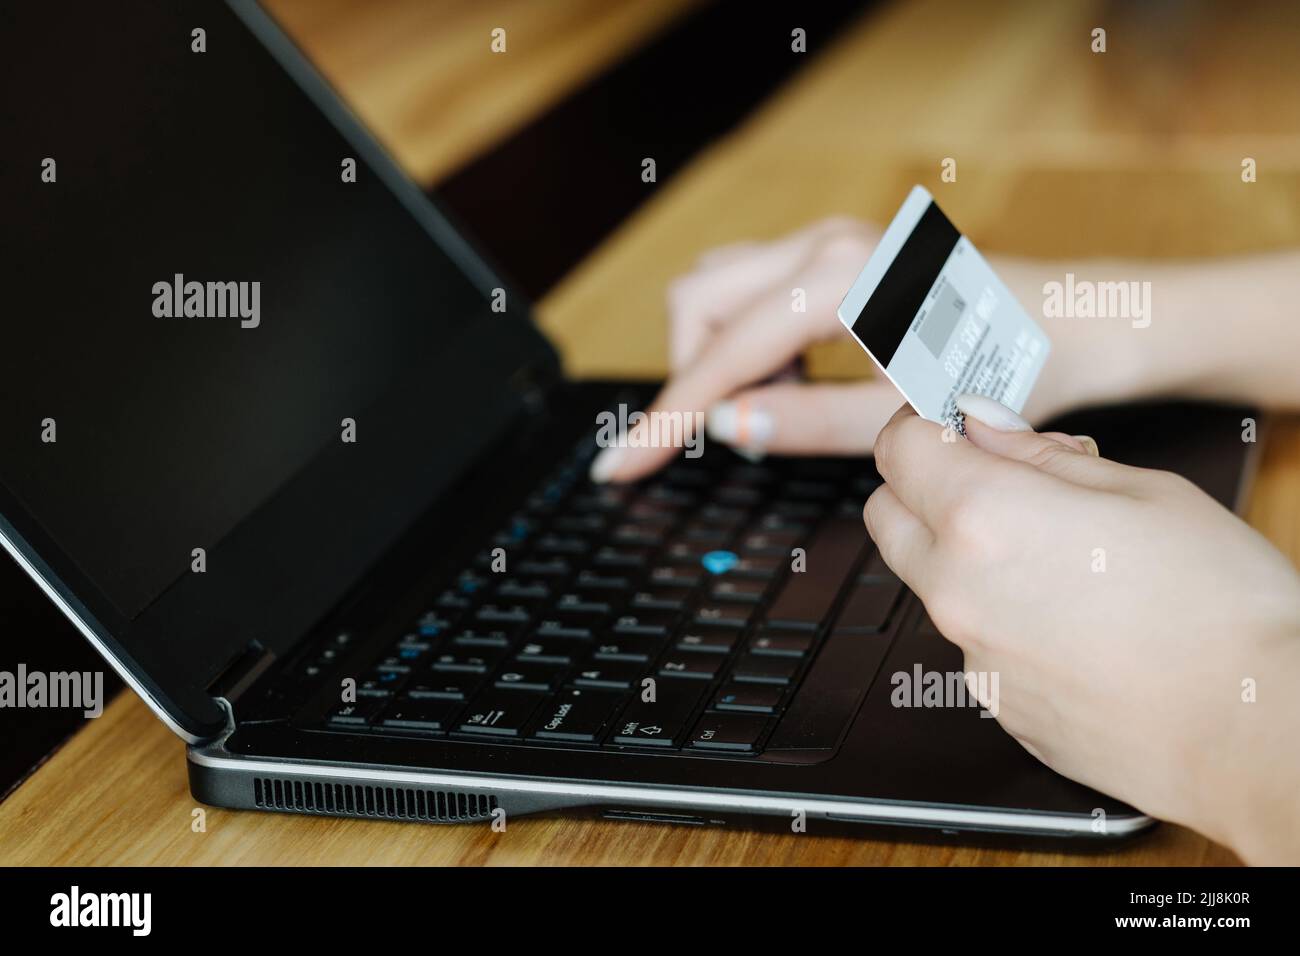 online store checkout internet shopping payment Stock Photo